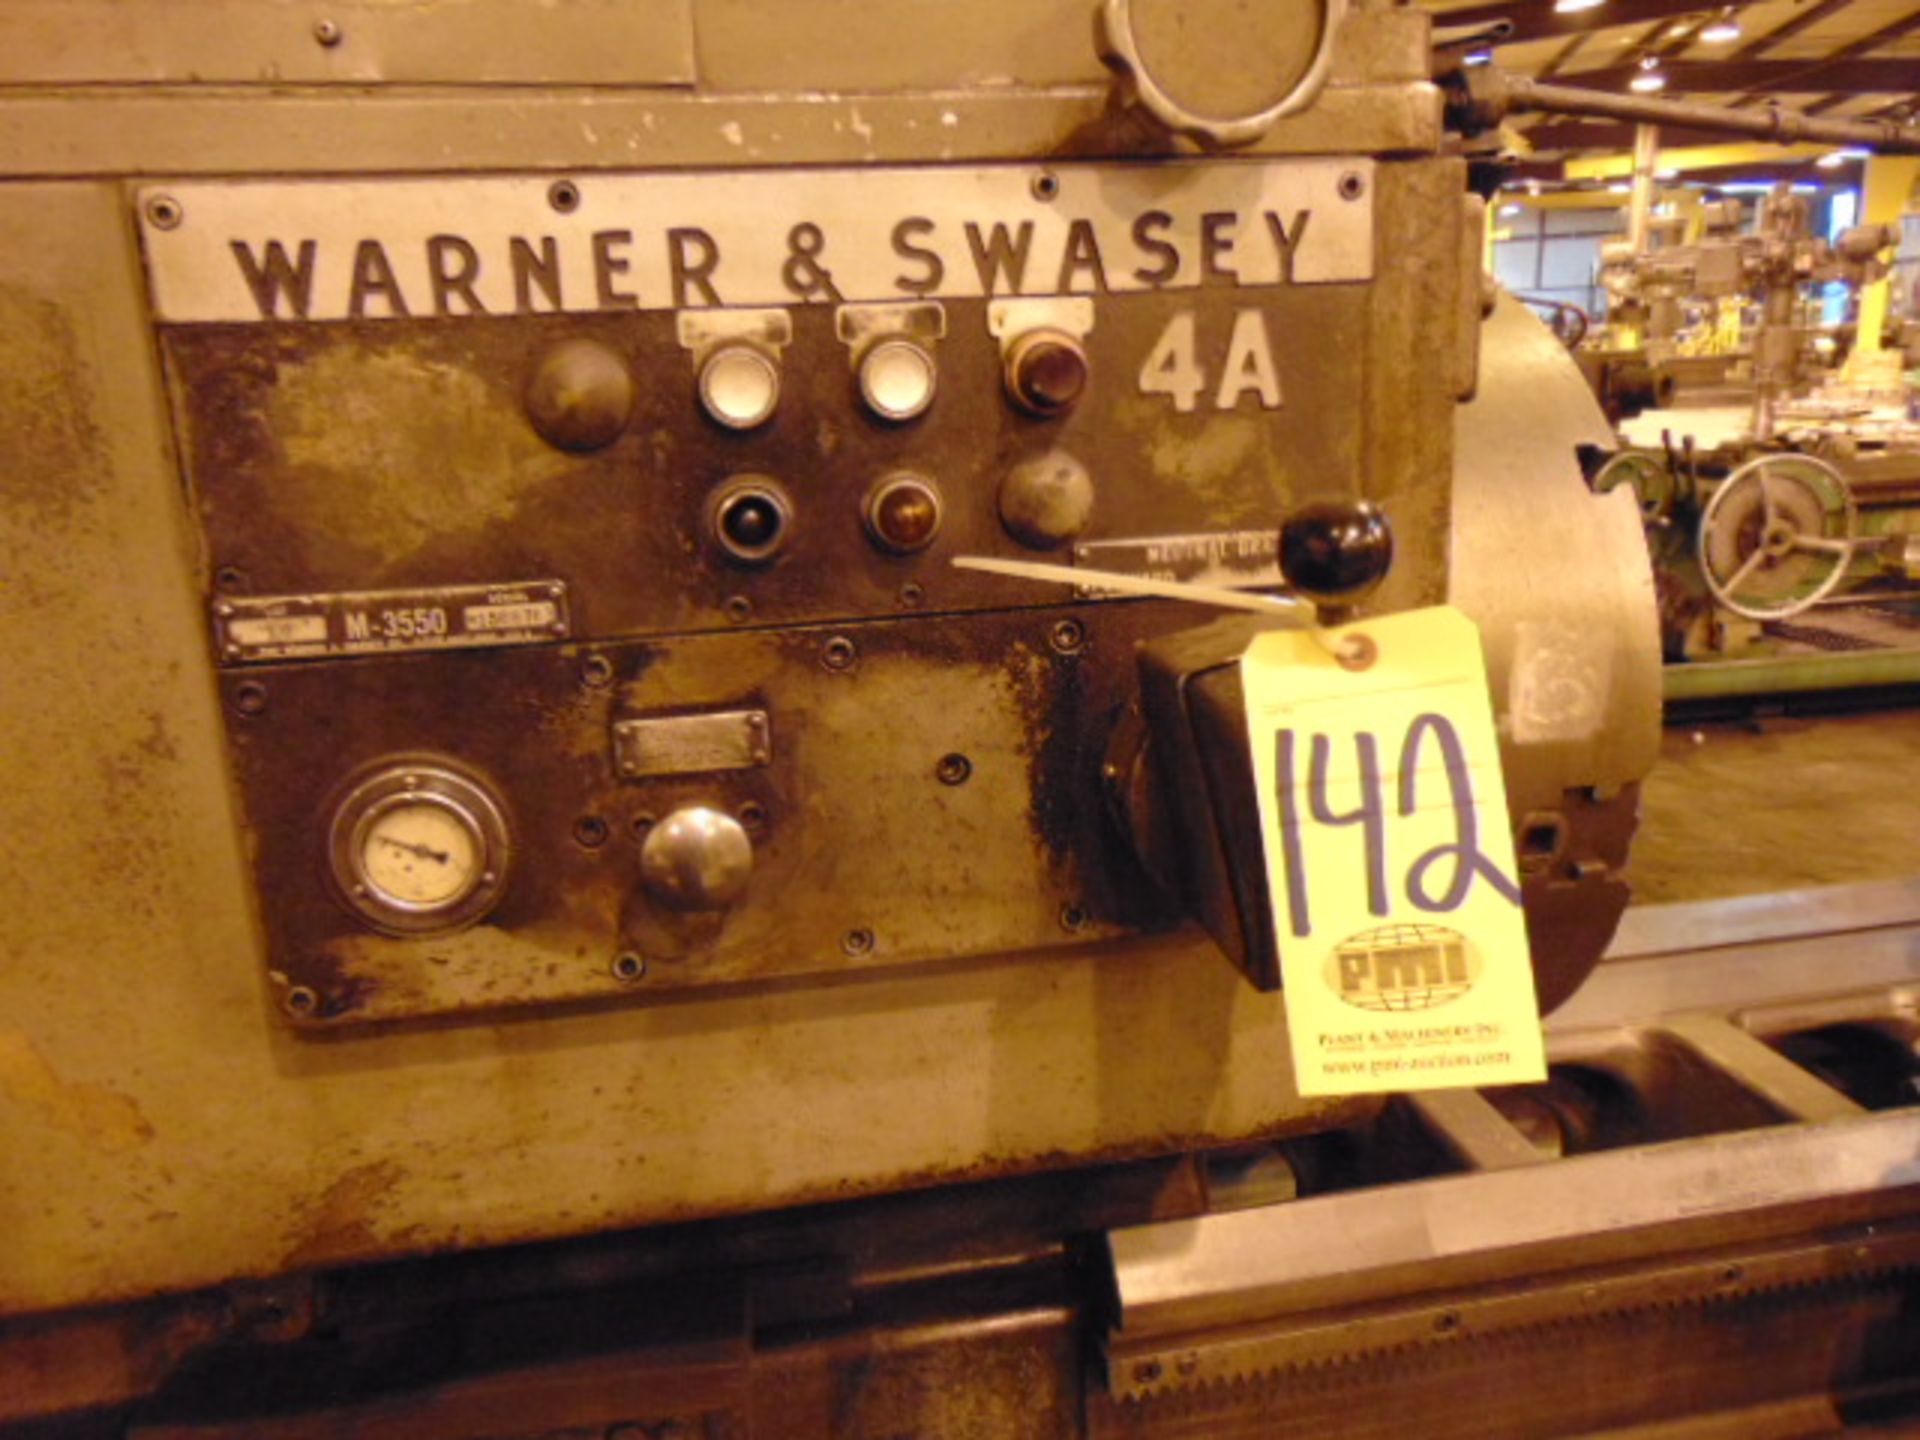 TURRET LATHE, WARNER & SWASEY MDL. 4A, M-3550, 9-1/2" spdl. bore, 6 pos. turret, fixed turret, 24" - Image 8 of 13